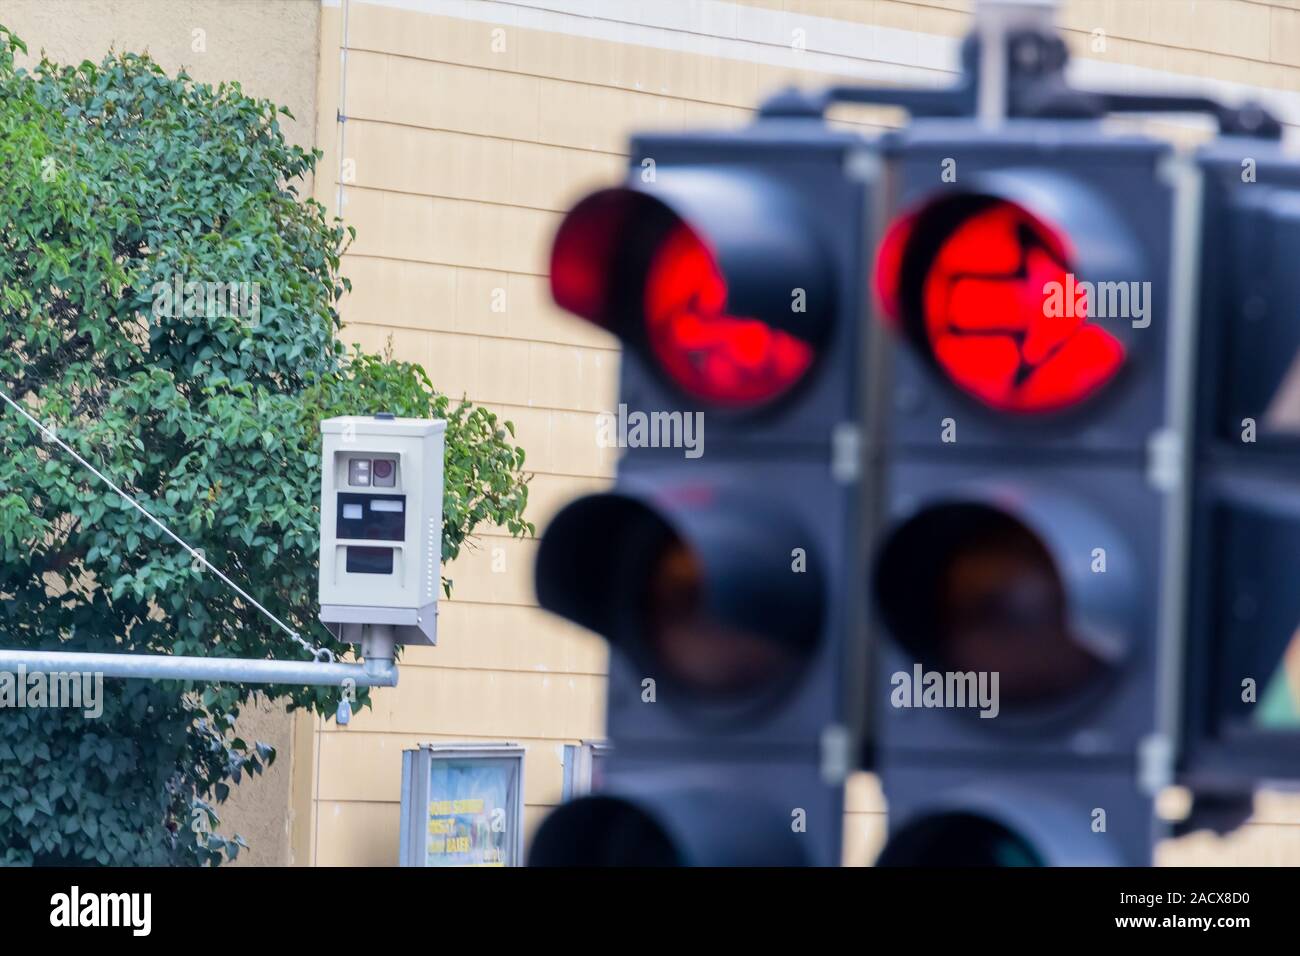 Traffic light with red light camera Stock Photo